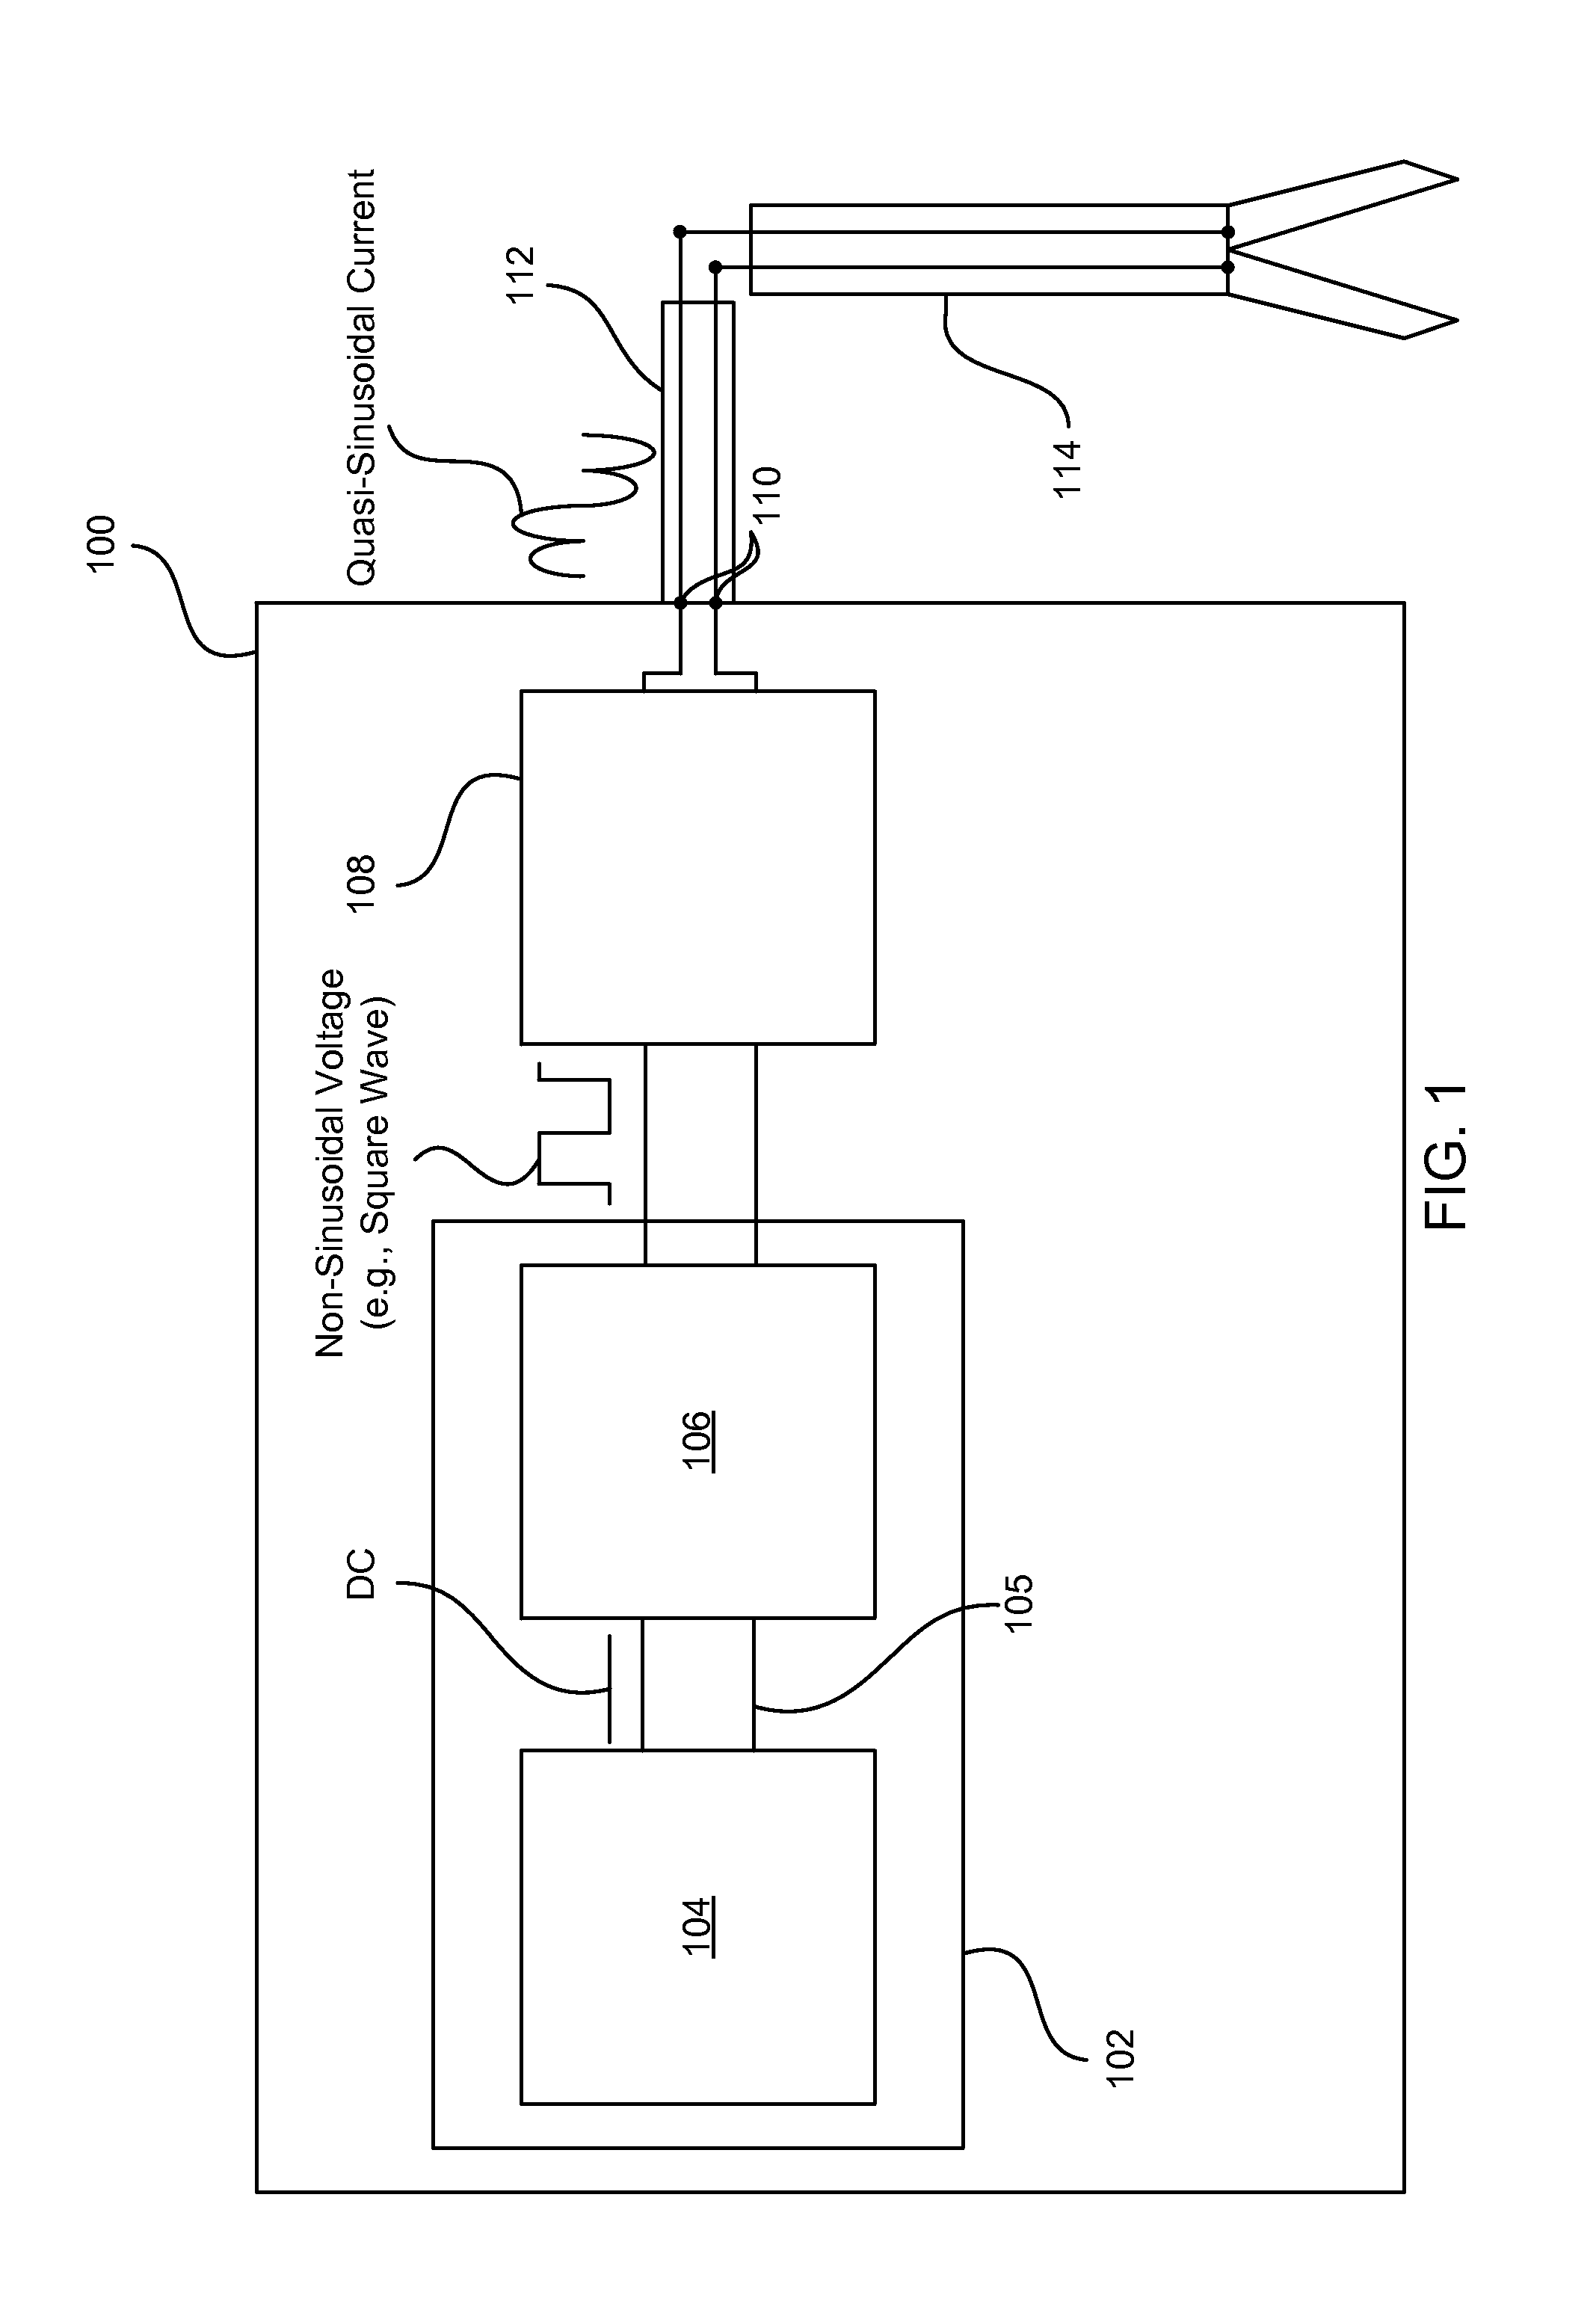 RF generator system for surgical vessel sealing